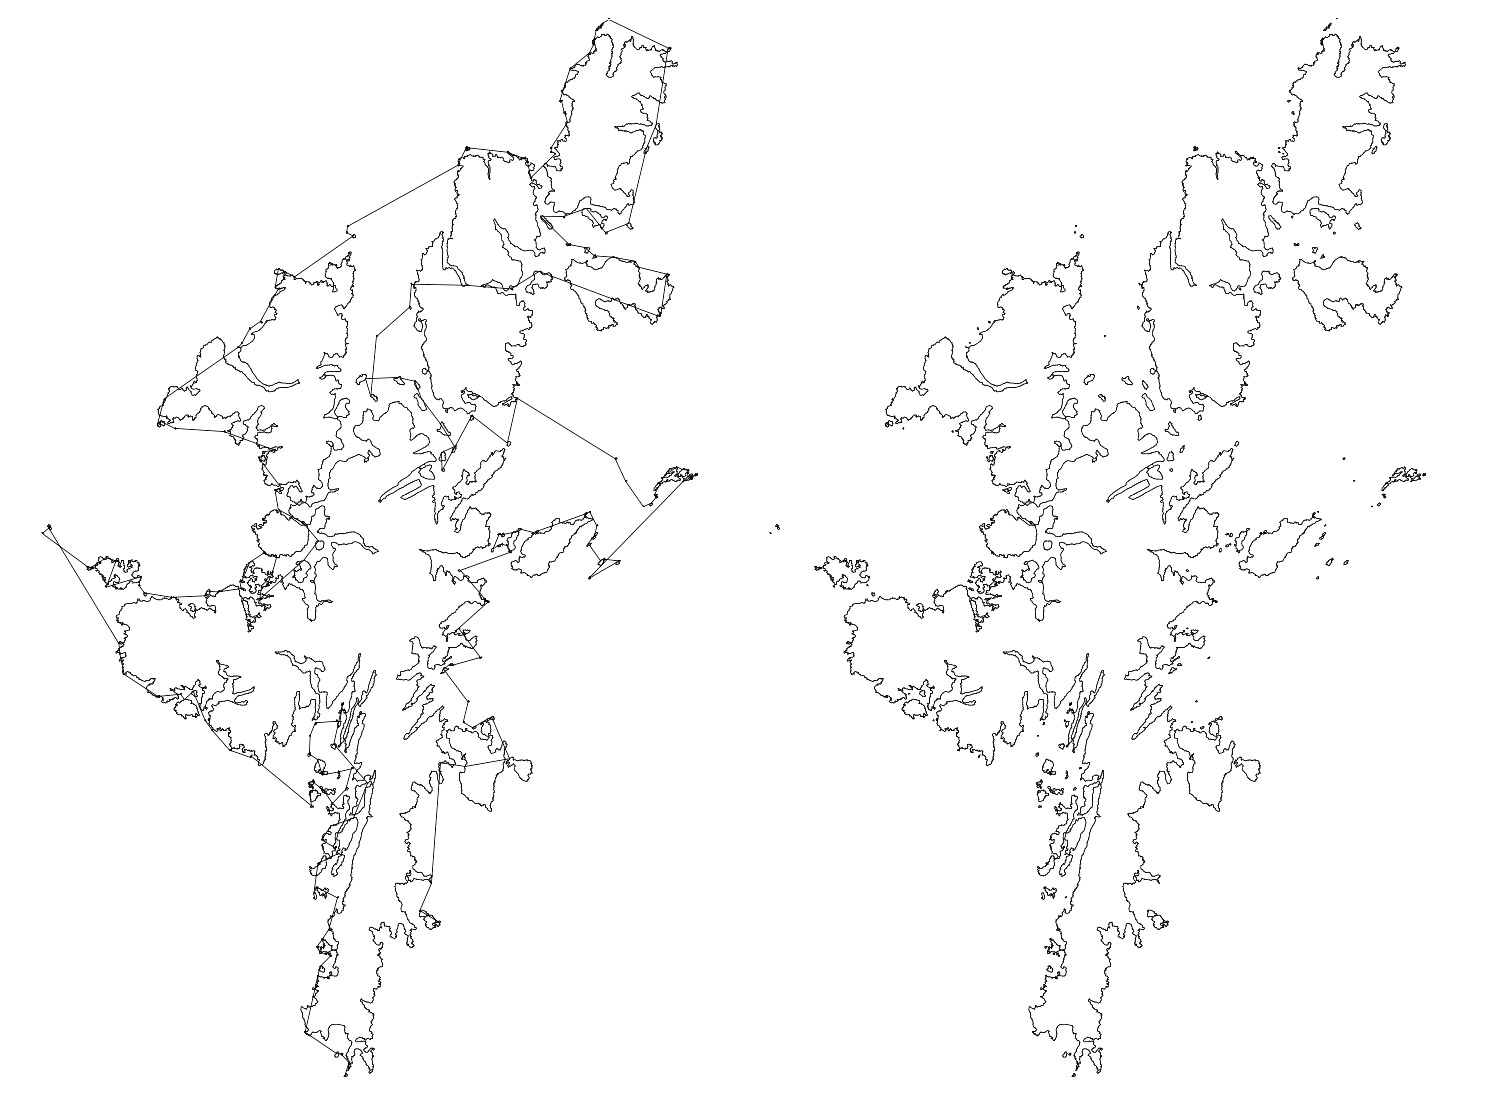 Shetland Islands with lines connecting each one to another